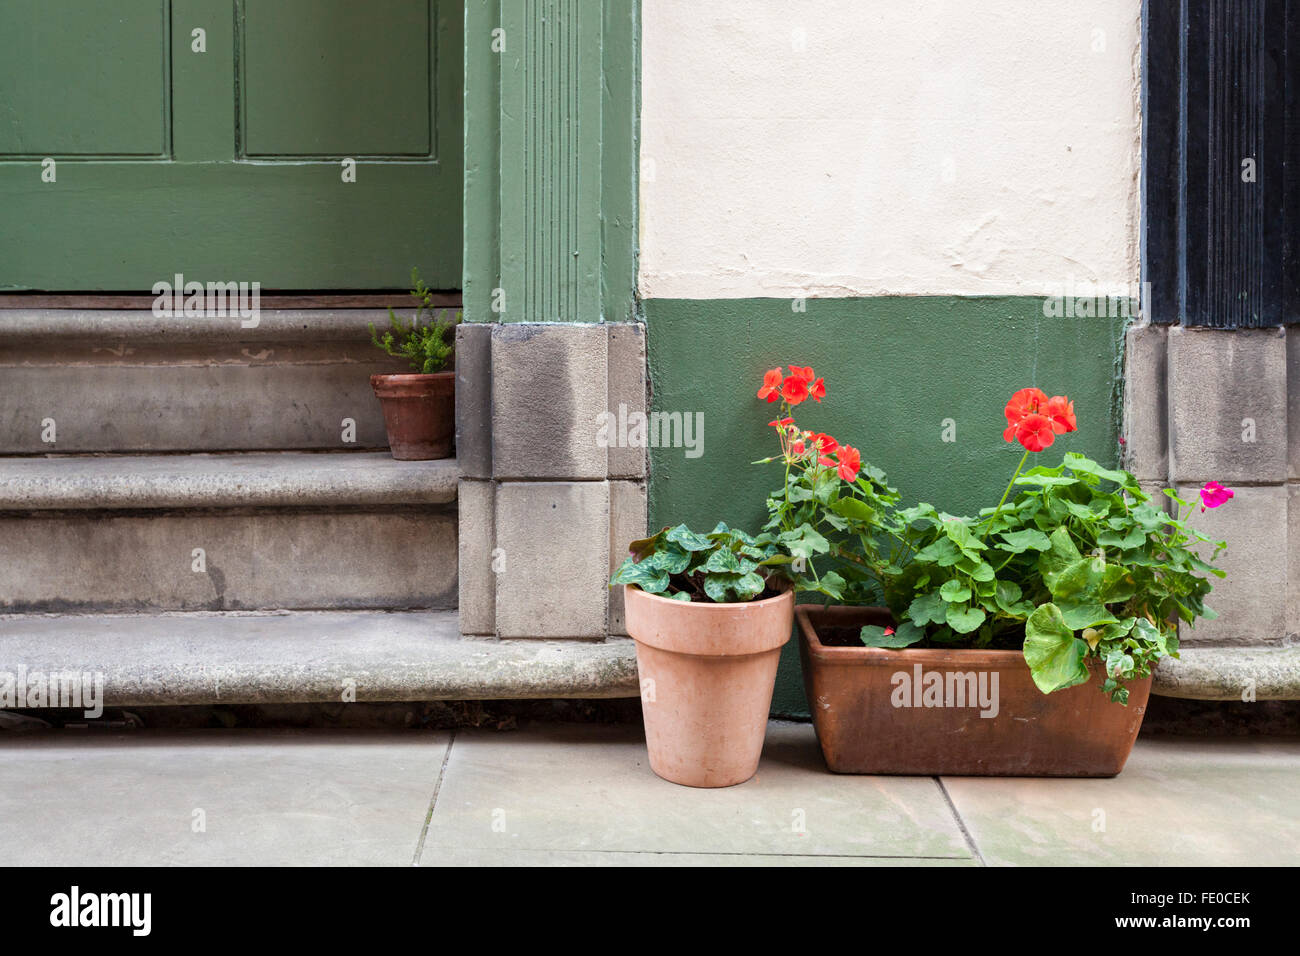 Flowers on a street. Flowerpots with pot plants outside on the pavement by a doorstep, Nottingham, England, UK Stock Photo